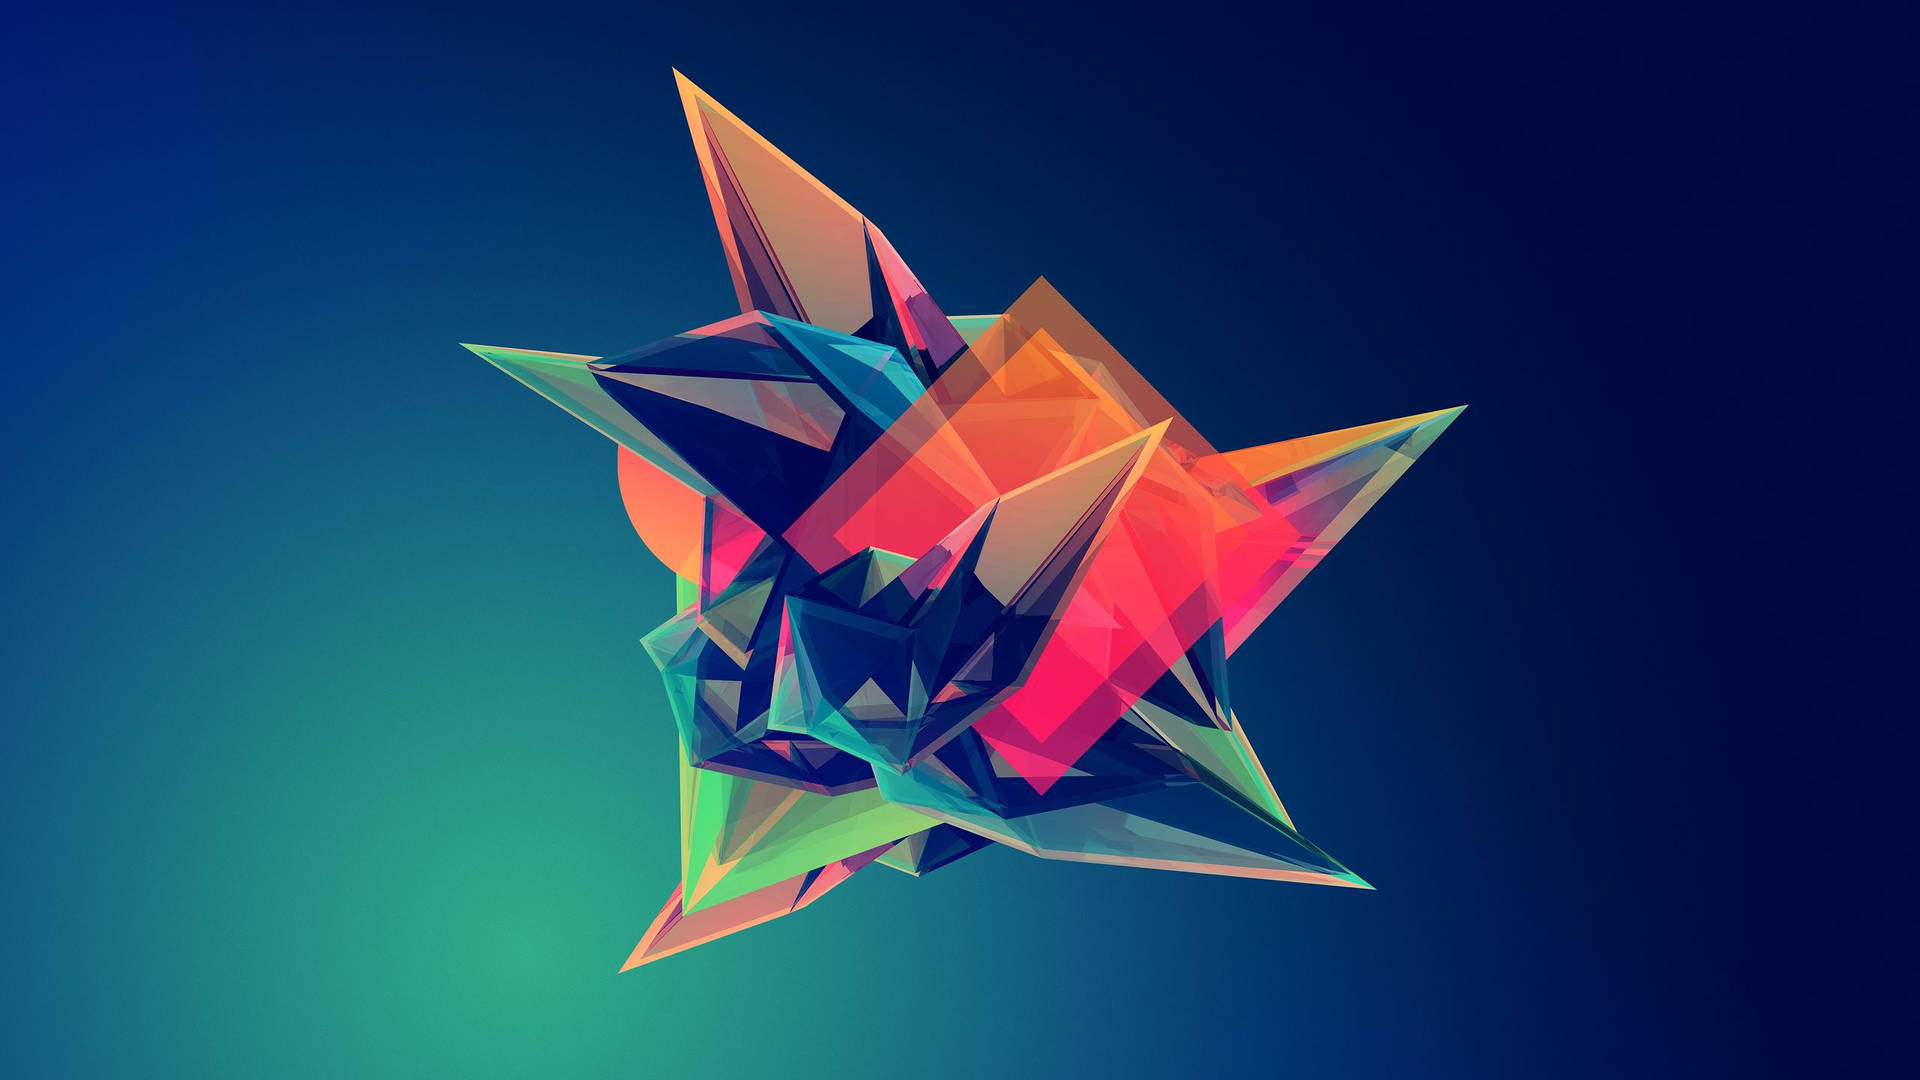 Awesome Geometric Shapes Origami Wallpaper